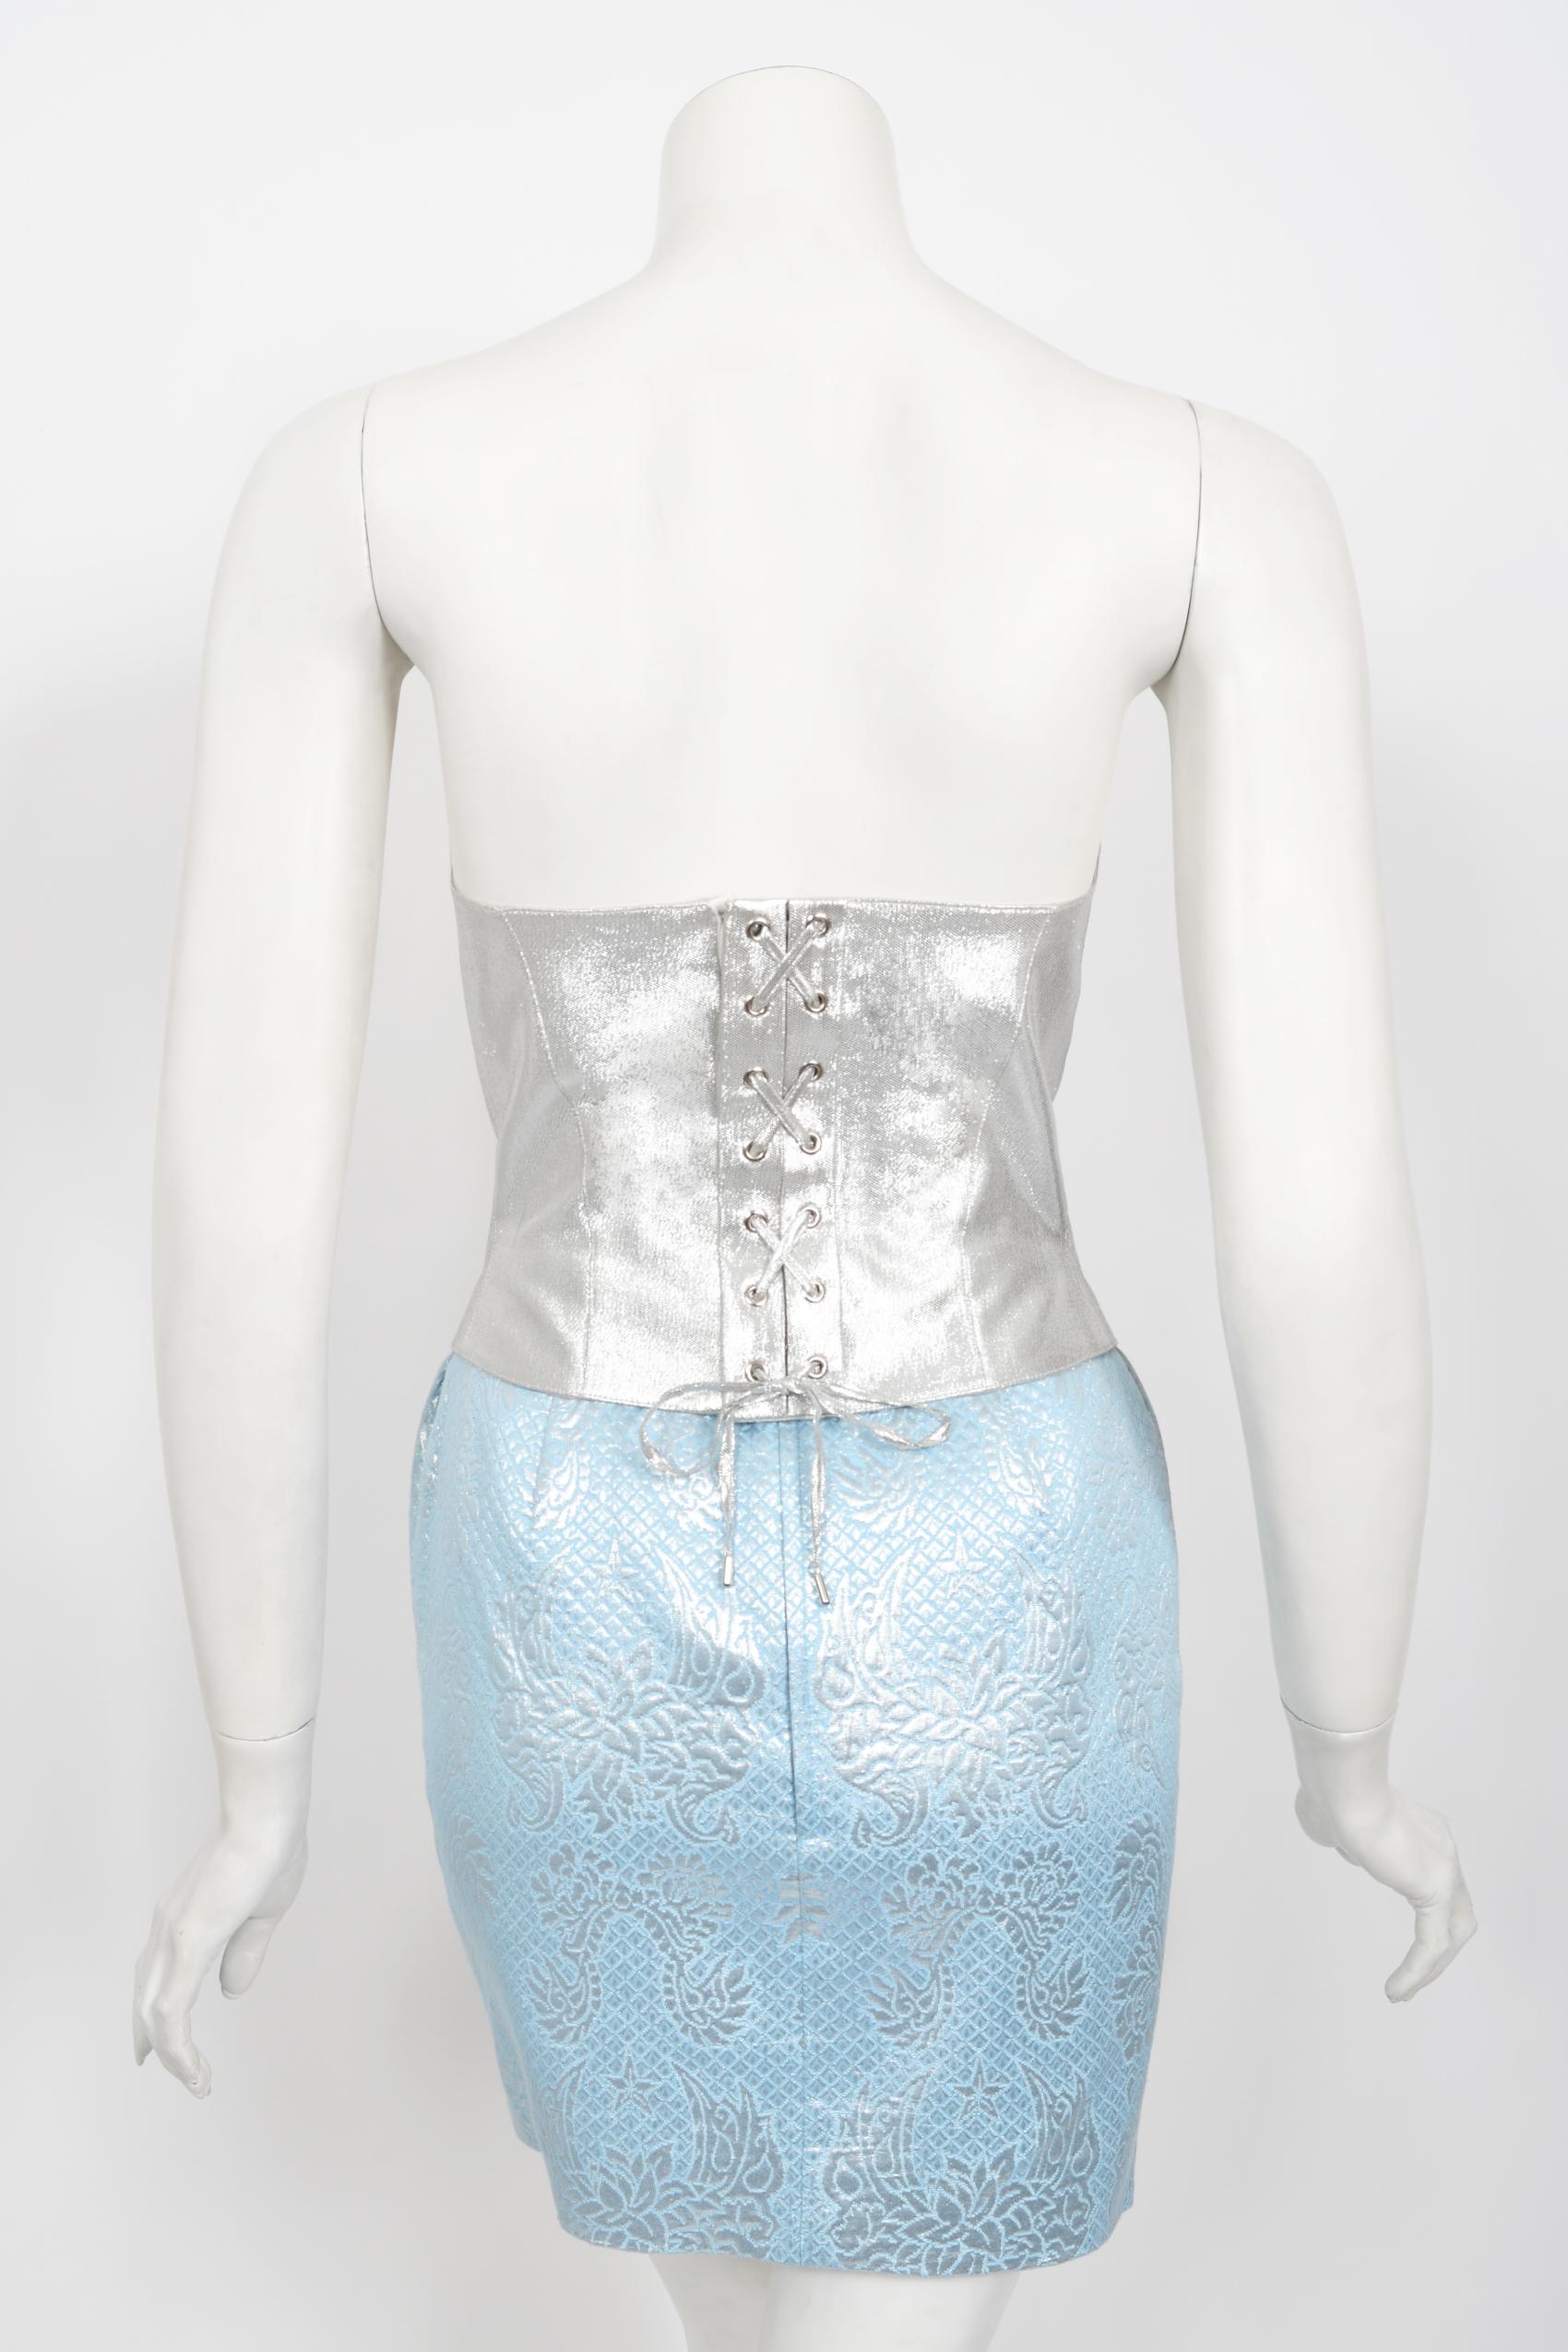 Iconic 1992 Thierry Mugler Couture Metallic Silver Blue Bustier Mini Skirt Suit 14